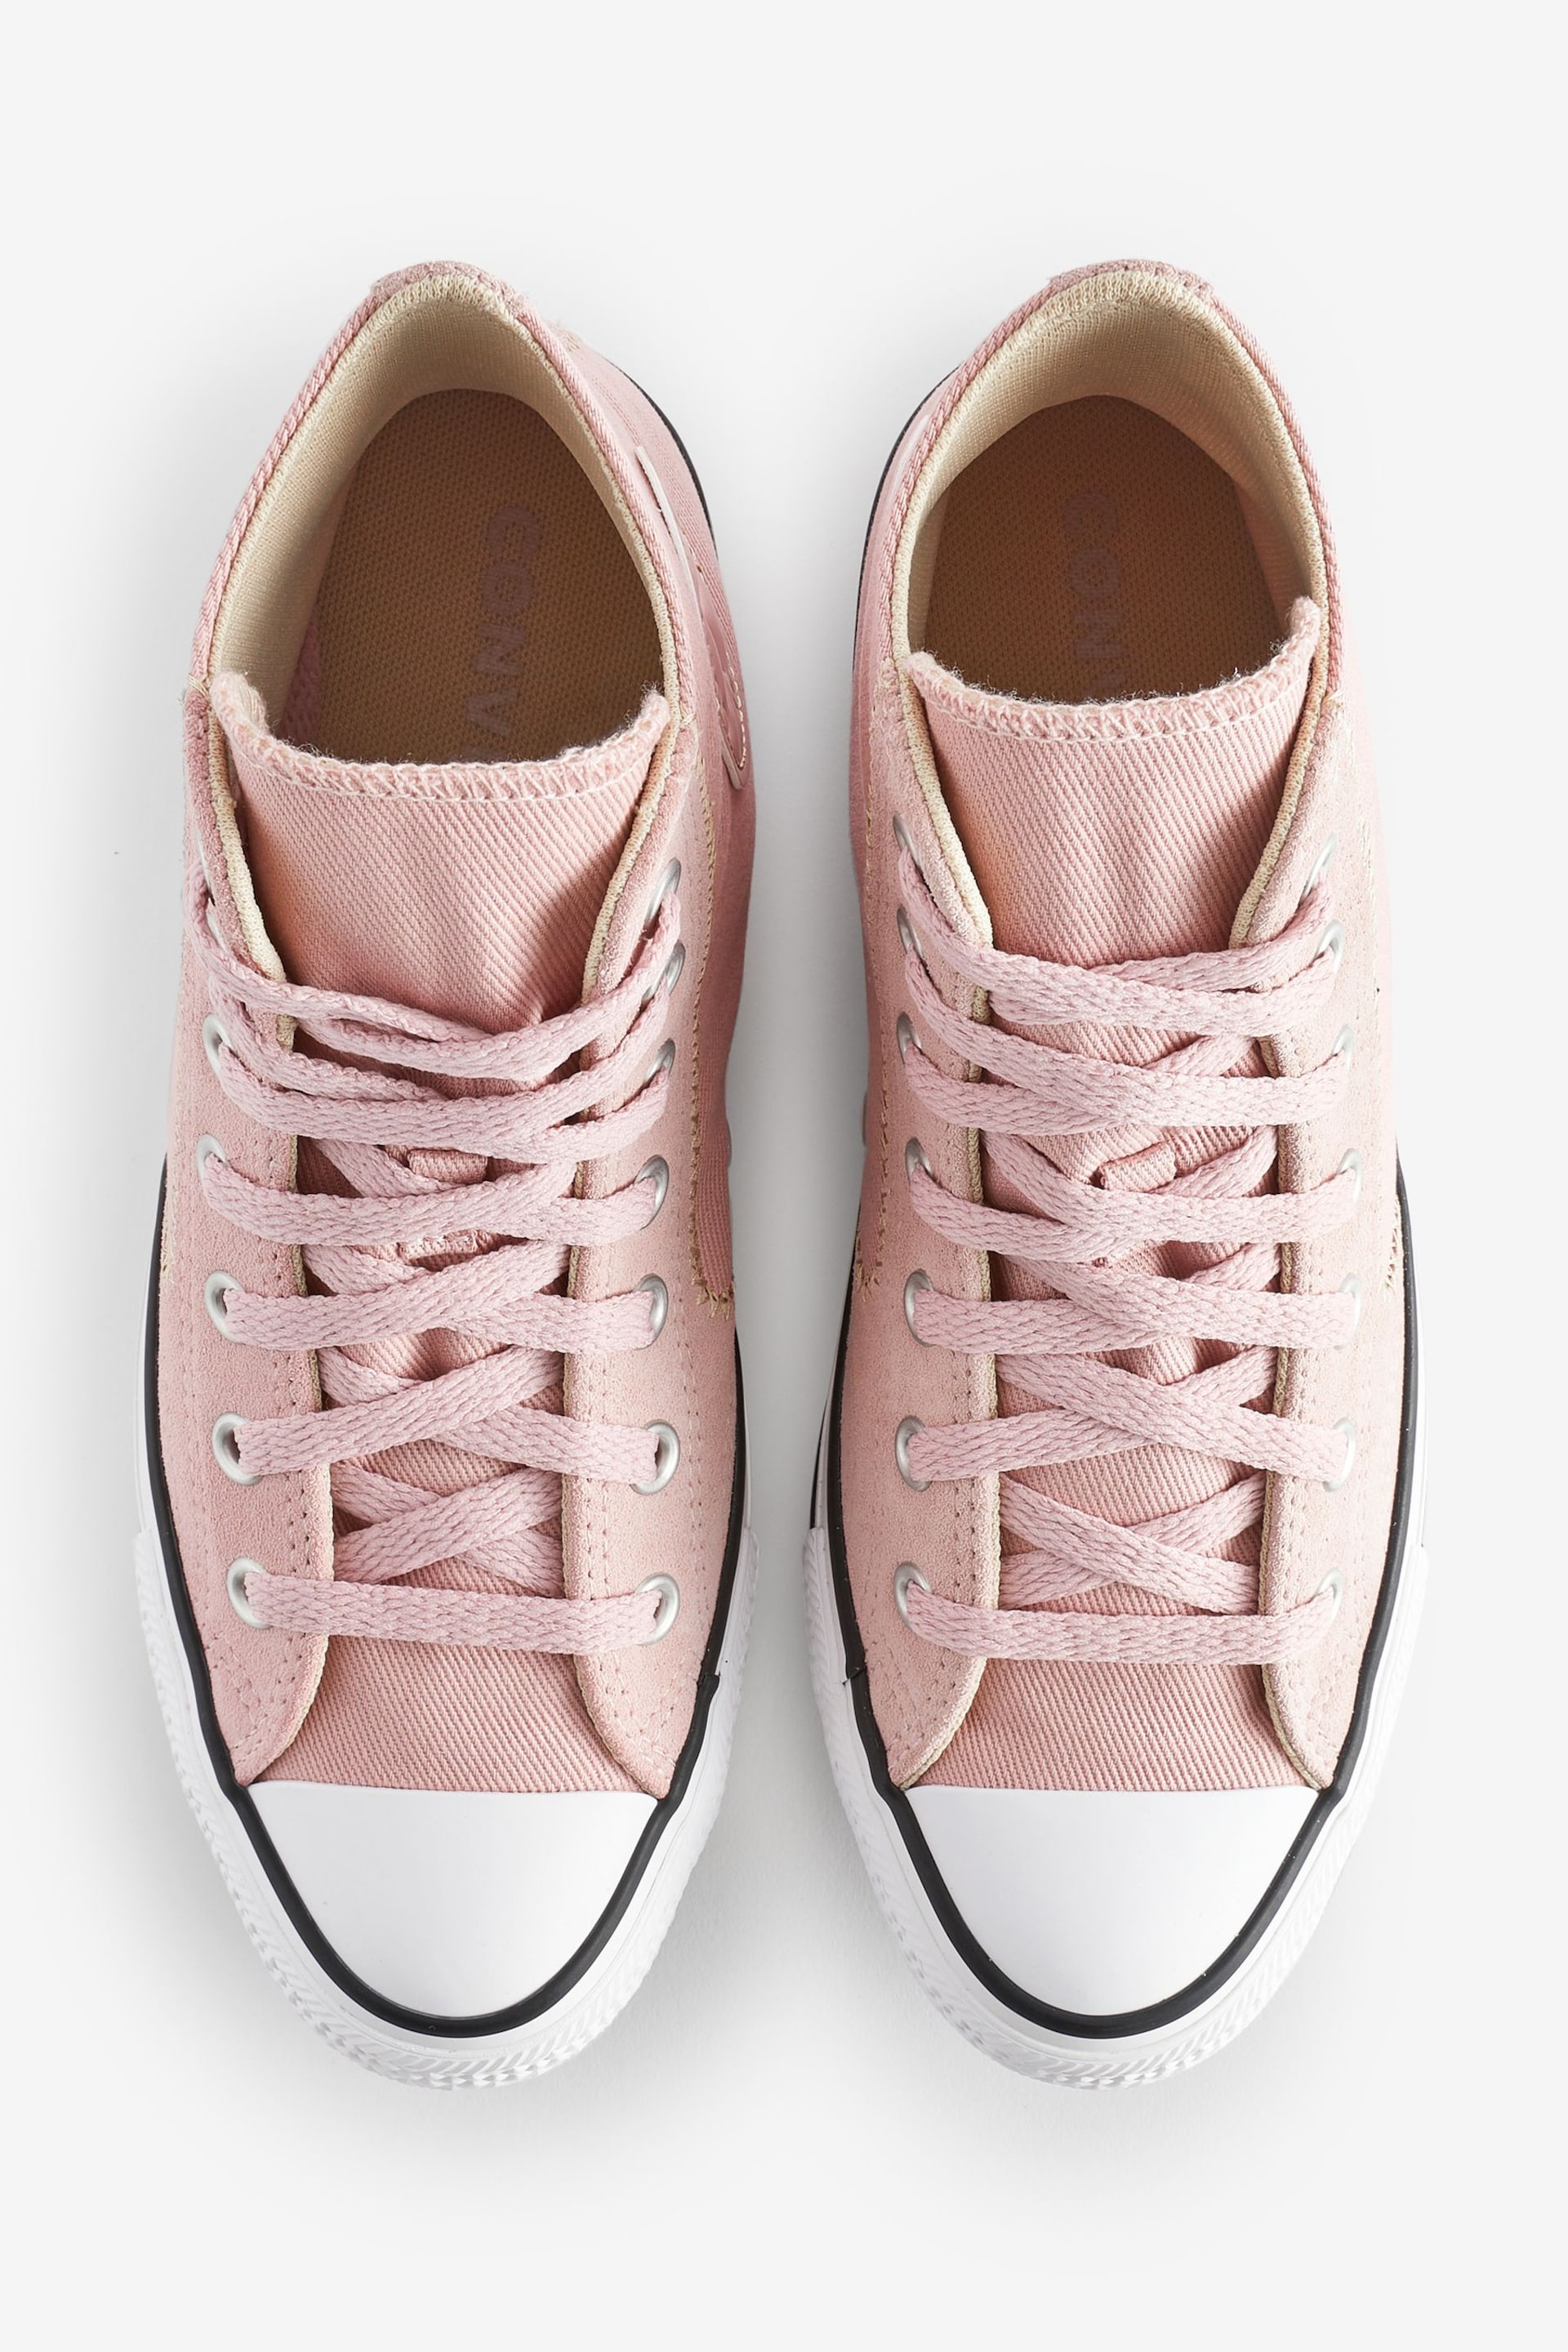 Converse Pink/White Chuck Taylor All Star High Top Trainers - Image 5 of 9